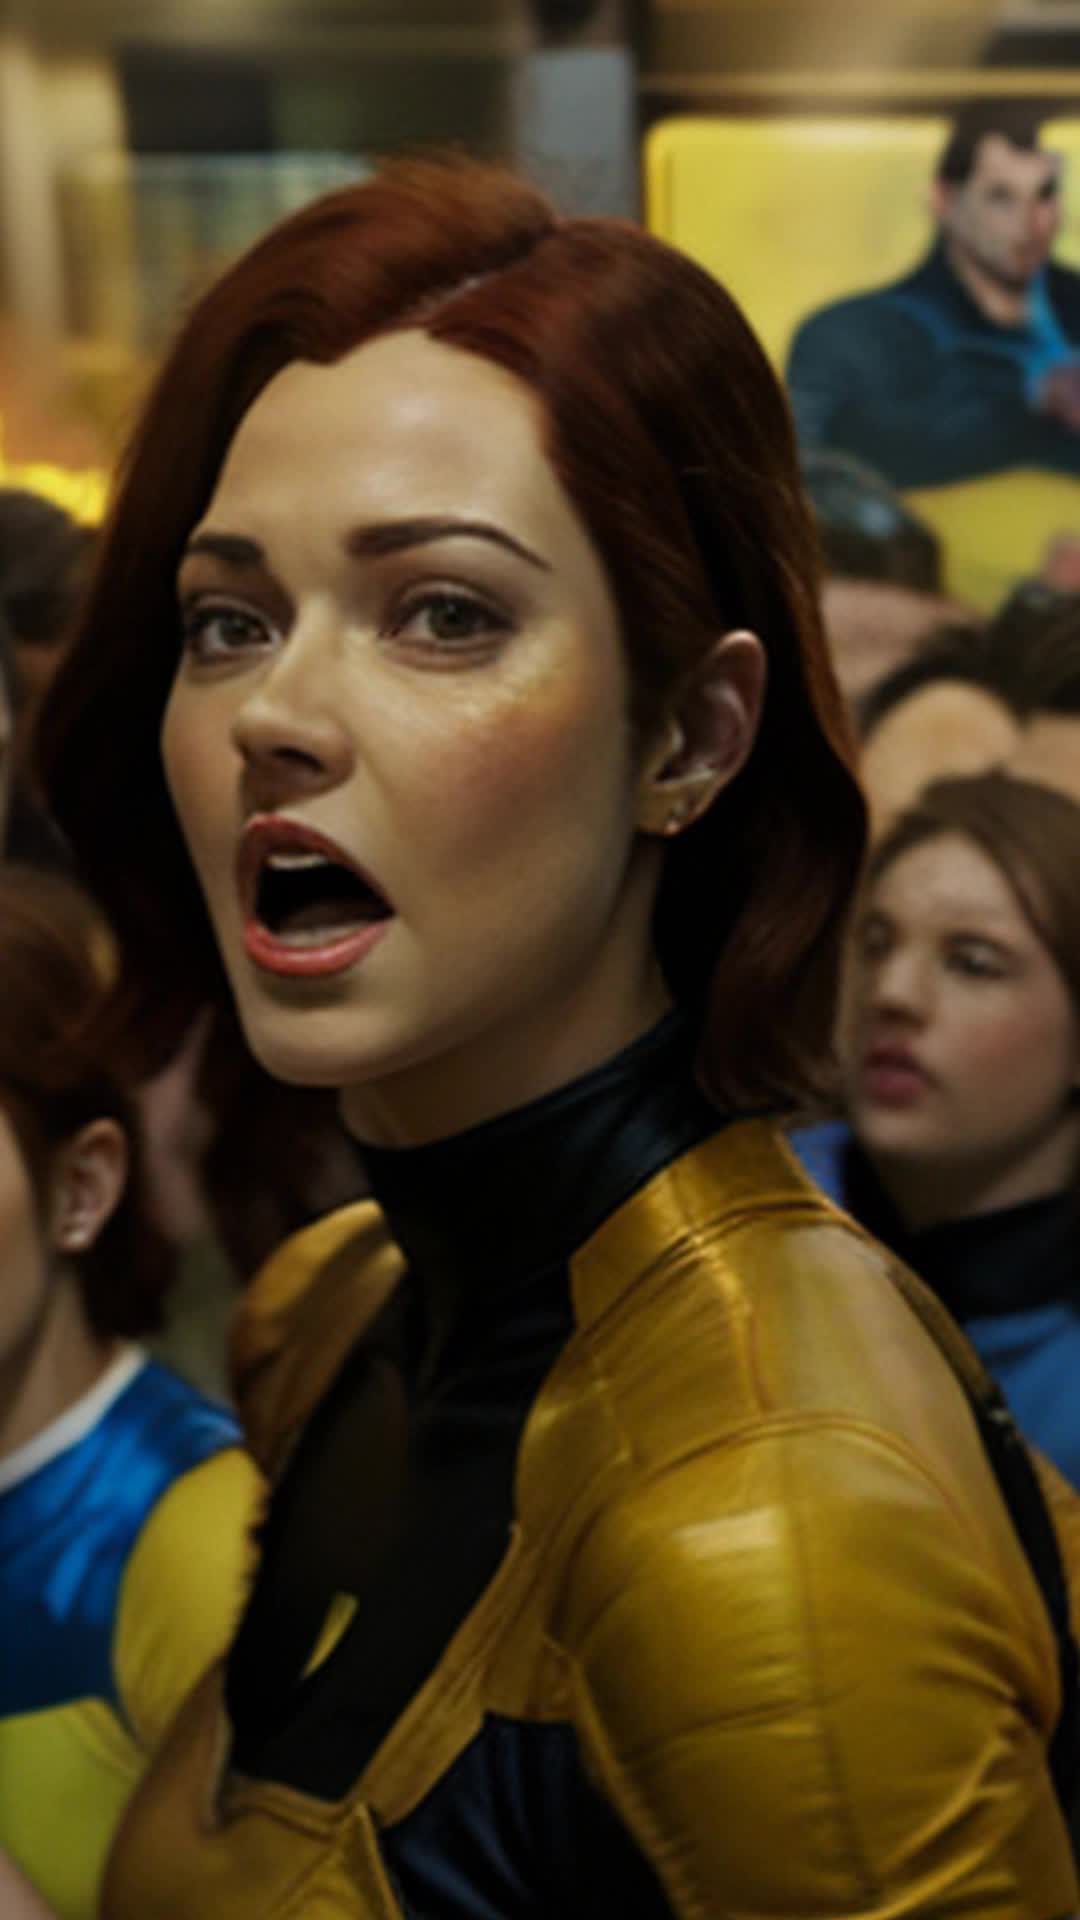 Intense discussion on 'Dark Phoenix Saga' by pop singer, comic book store setting, animated hand gestures, emphasized voice rising over crowd, passionate defense of Jean Grey, flashing eyes, excited expression, growing audience of shocked fans, dramatic flourish ending, onlookers capturing moment on phones